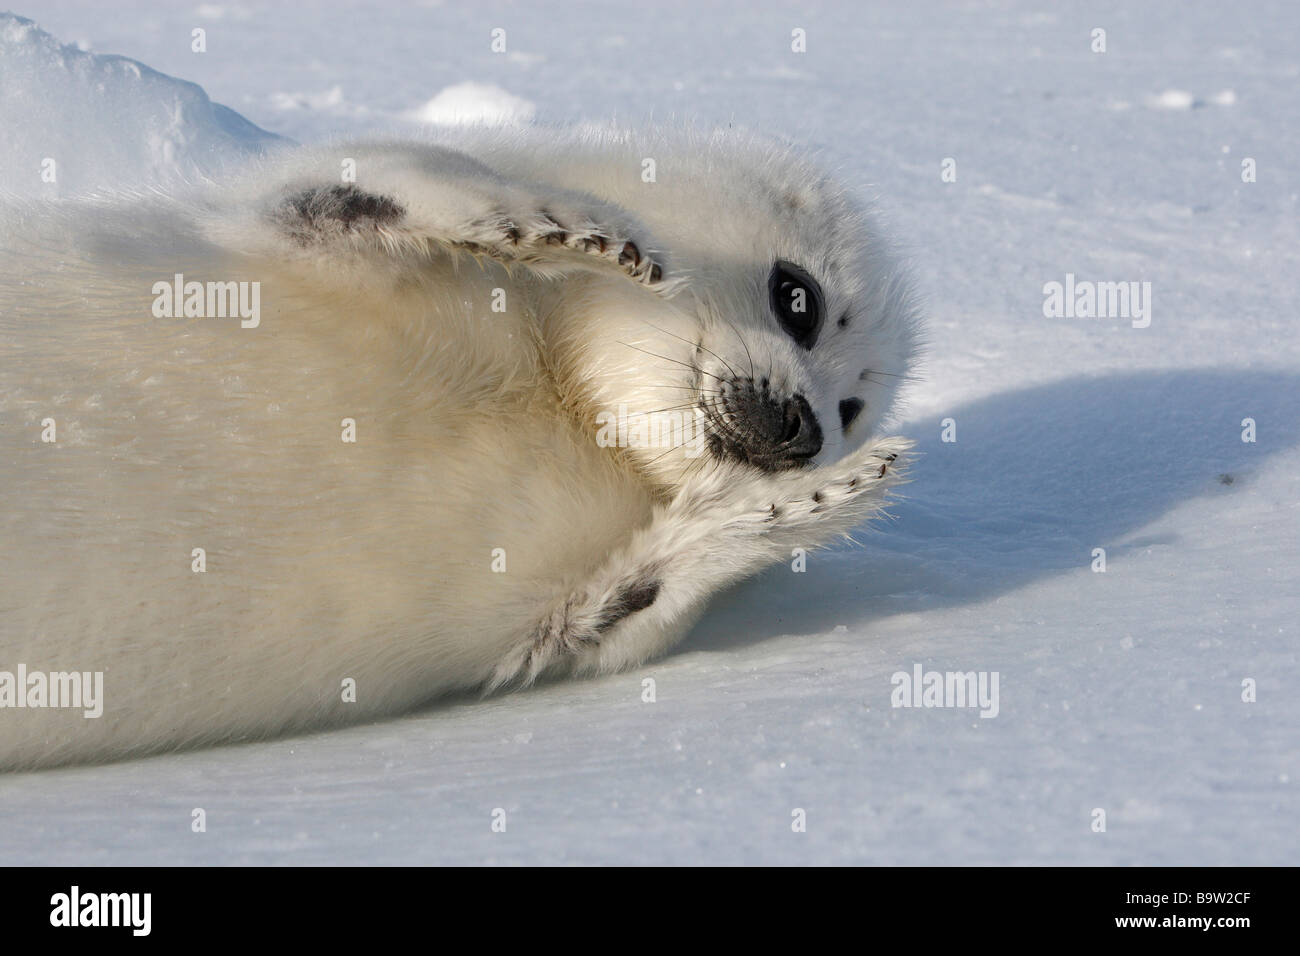 Harp Seal (Pagophilus groenlandicus). Playful pup (whitecoat) on ice Stock Photo